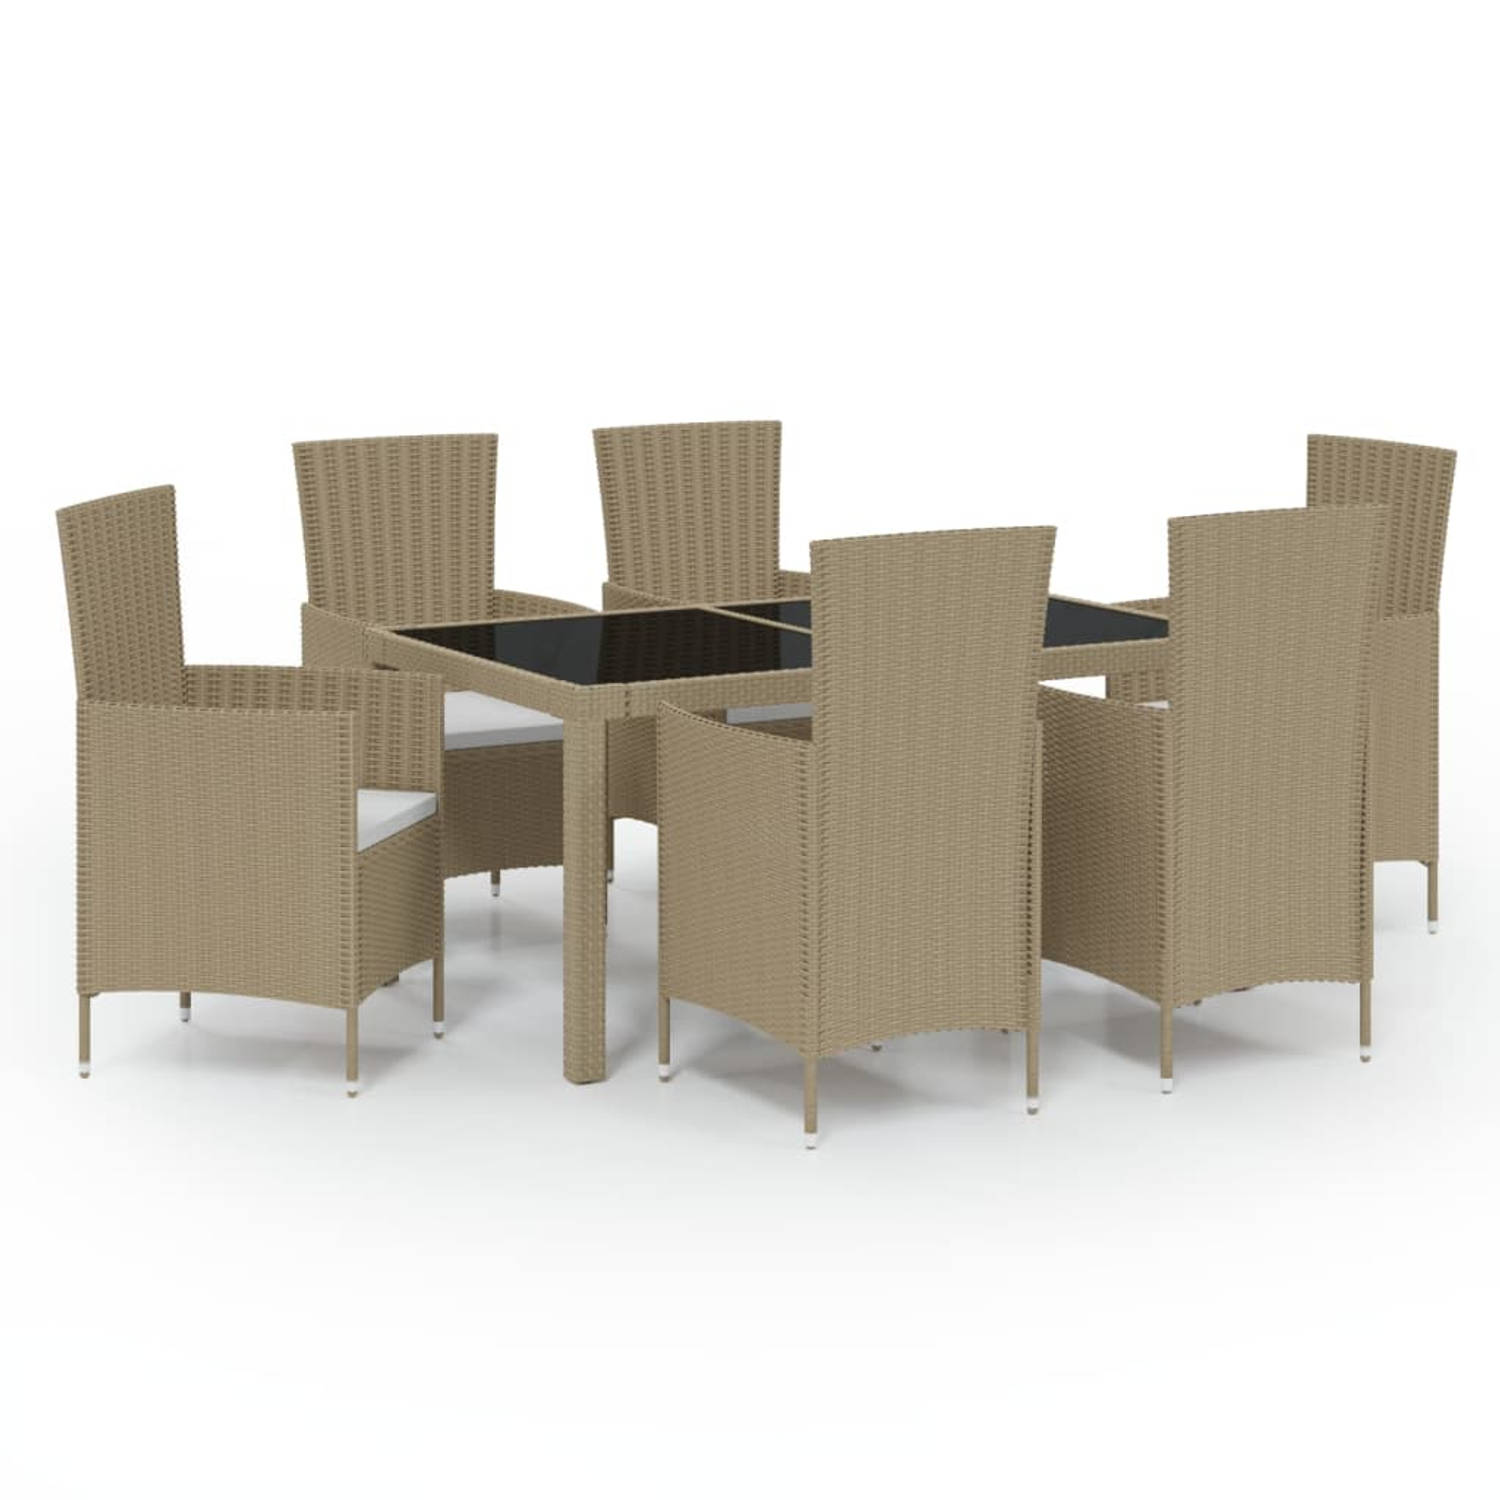 The Living Store 7-delige Tuinset met kussens poly rattan beige - Tuinset